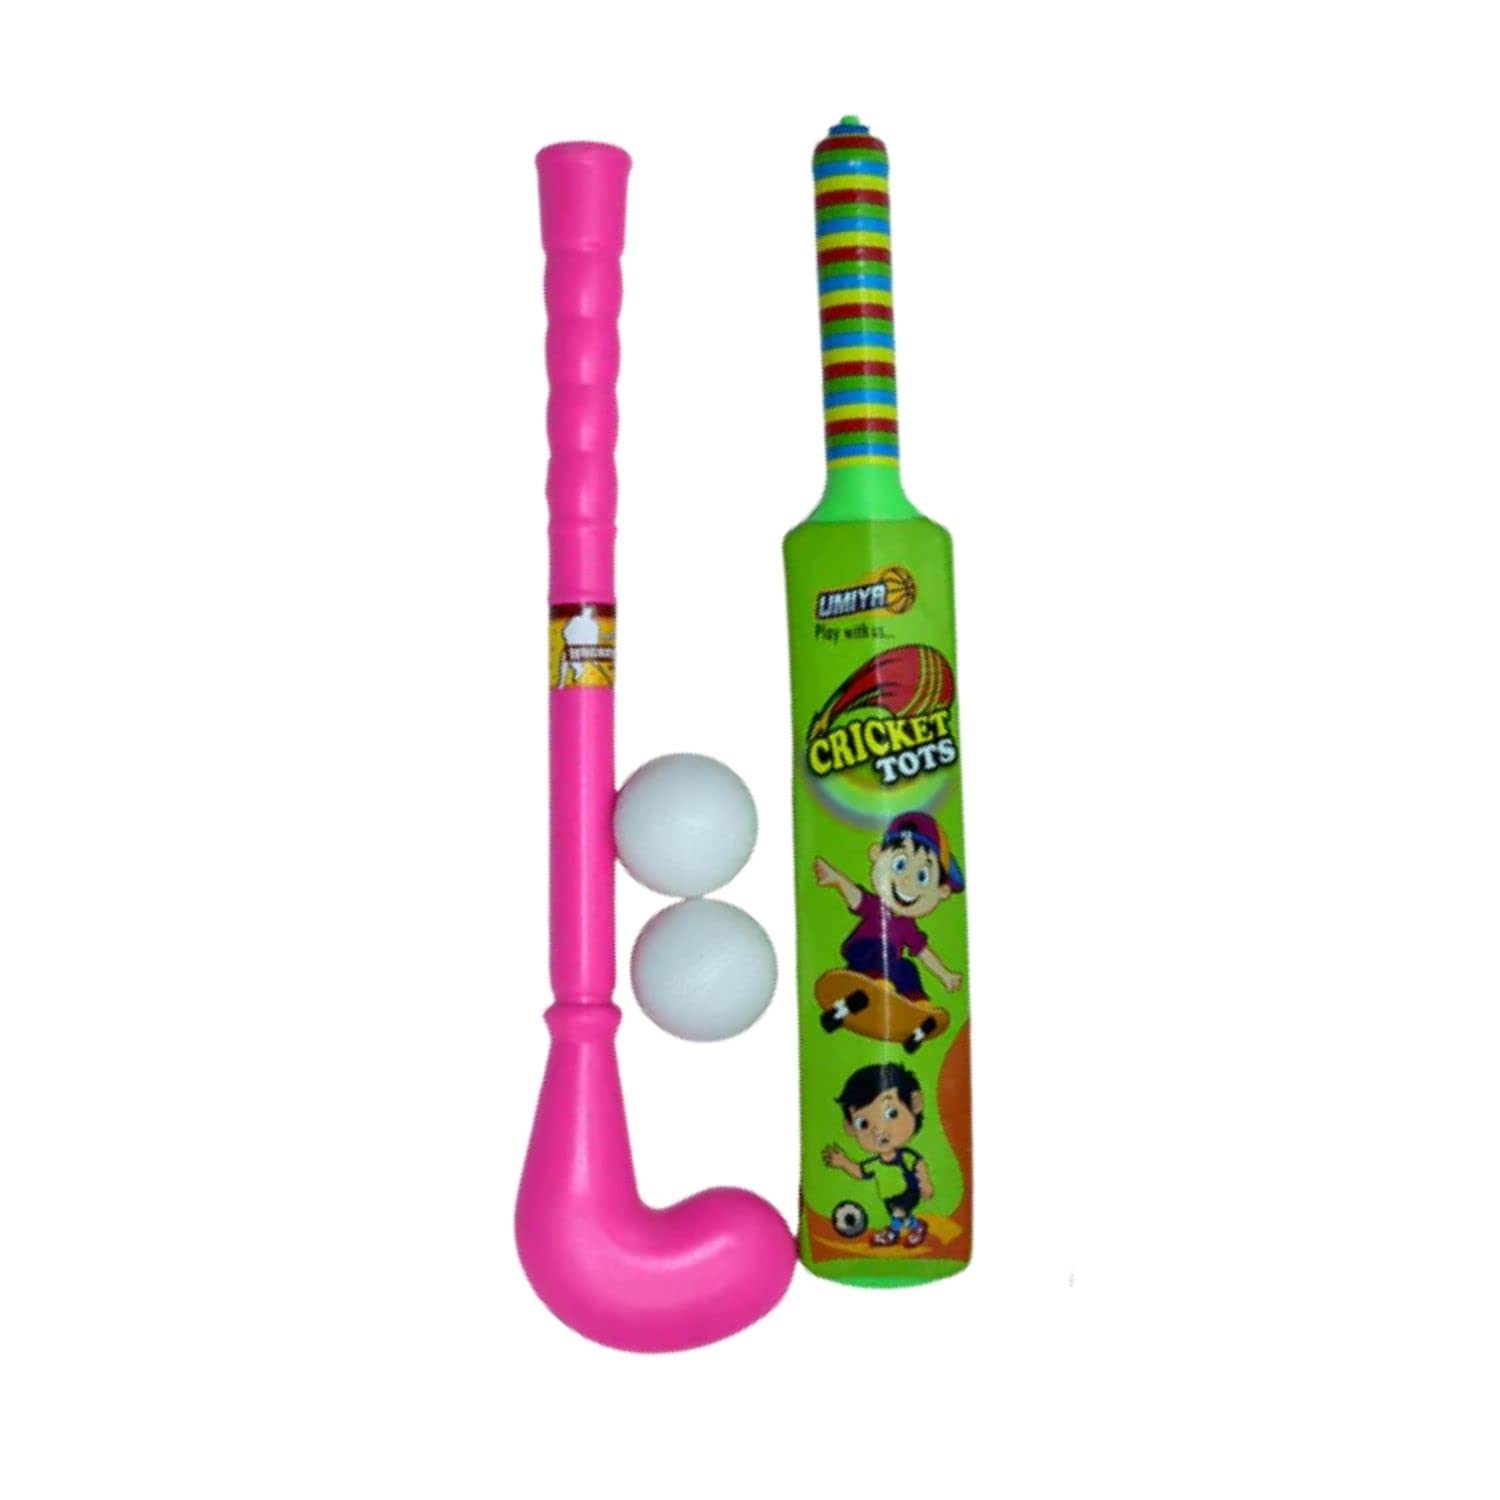 Kids Mandi lightweight bat, ball, and hockey combo. Ideal for indoor/outdoor play. Non-toxic, child-safe. Great gift for boys/girls. Color may vary.